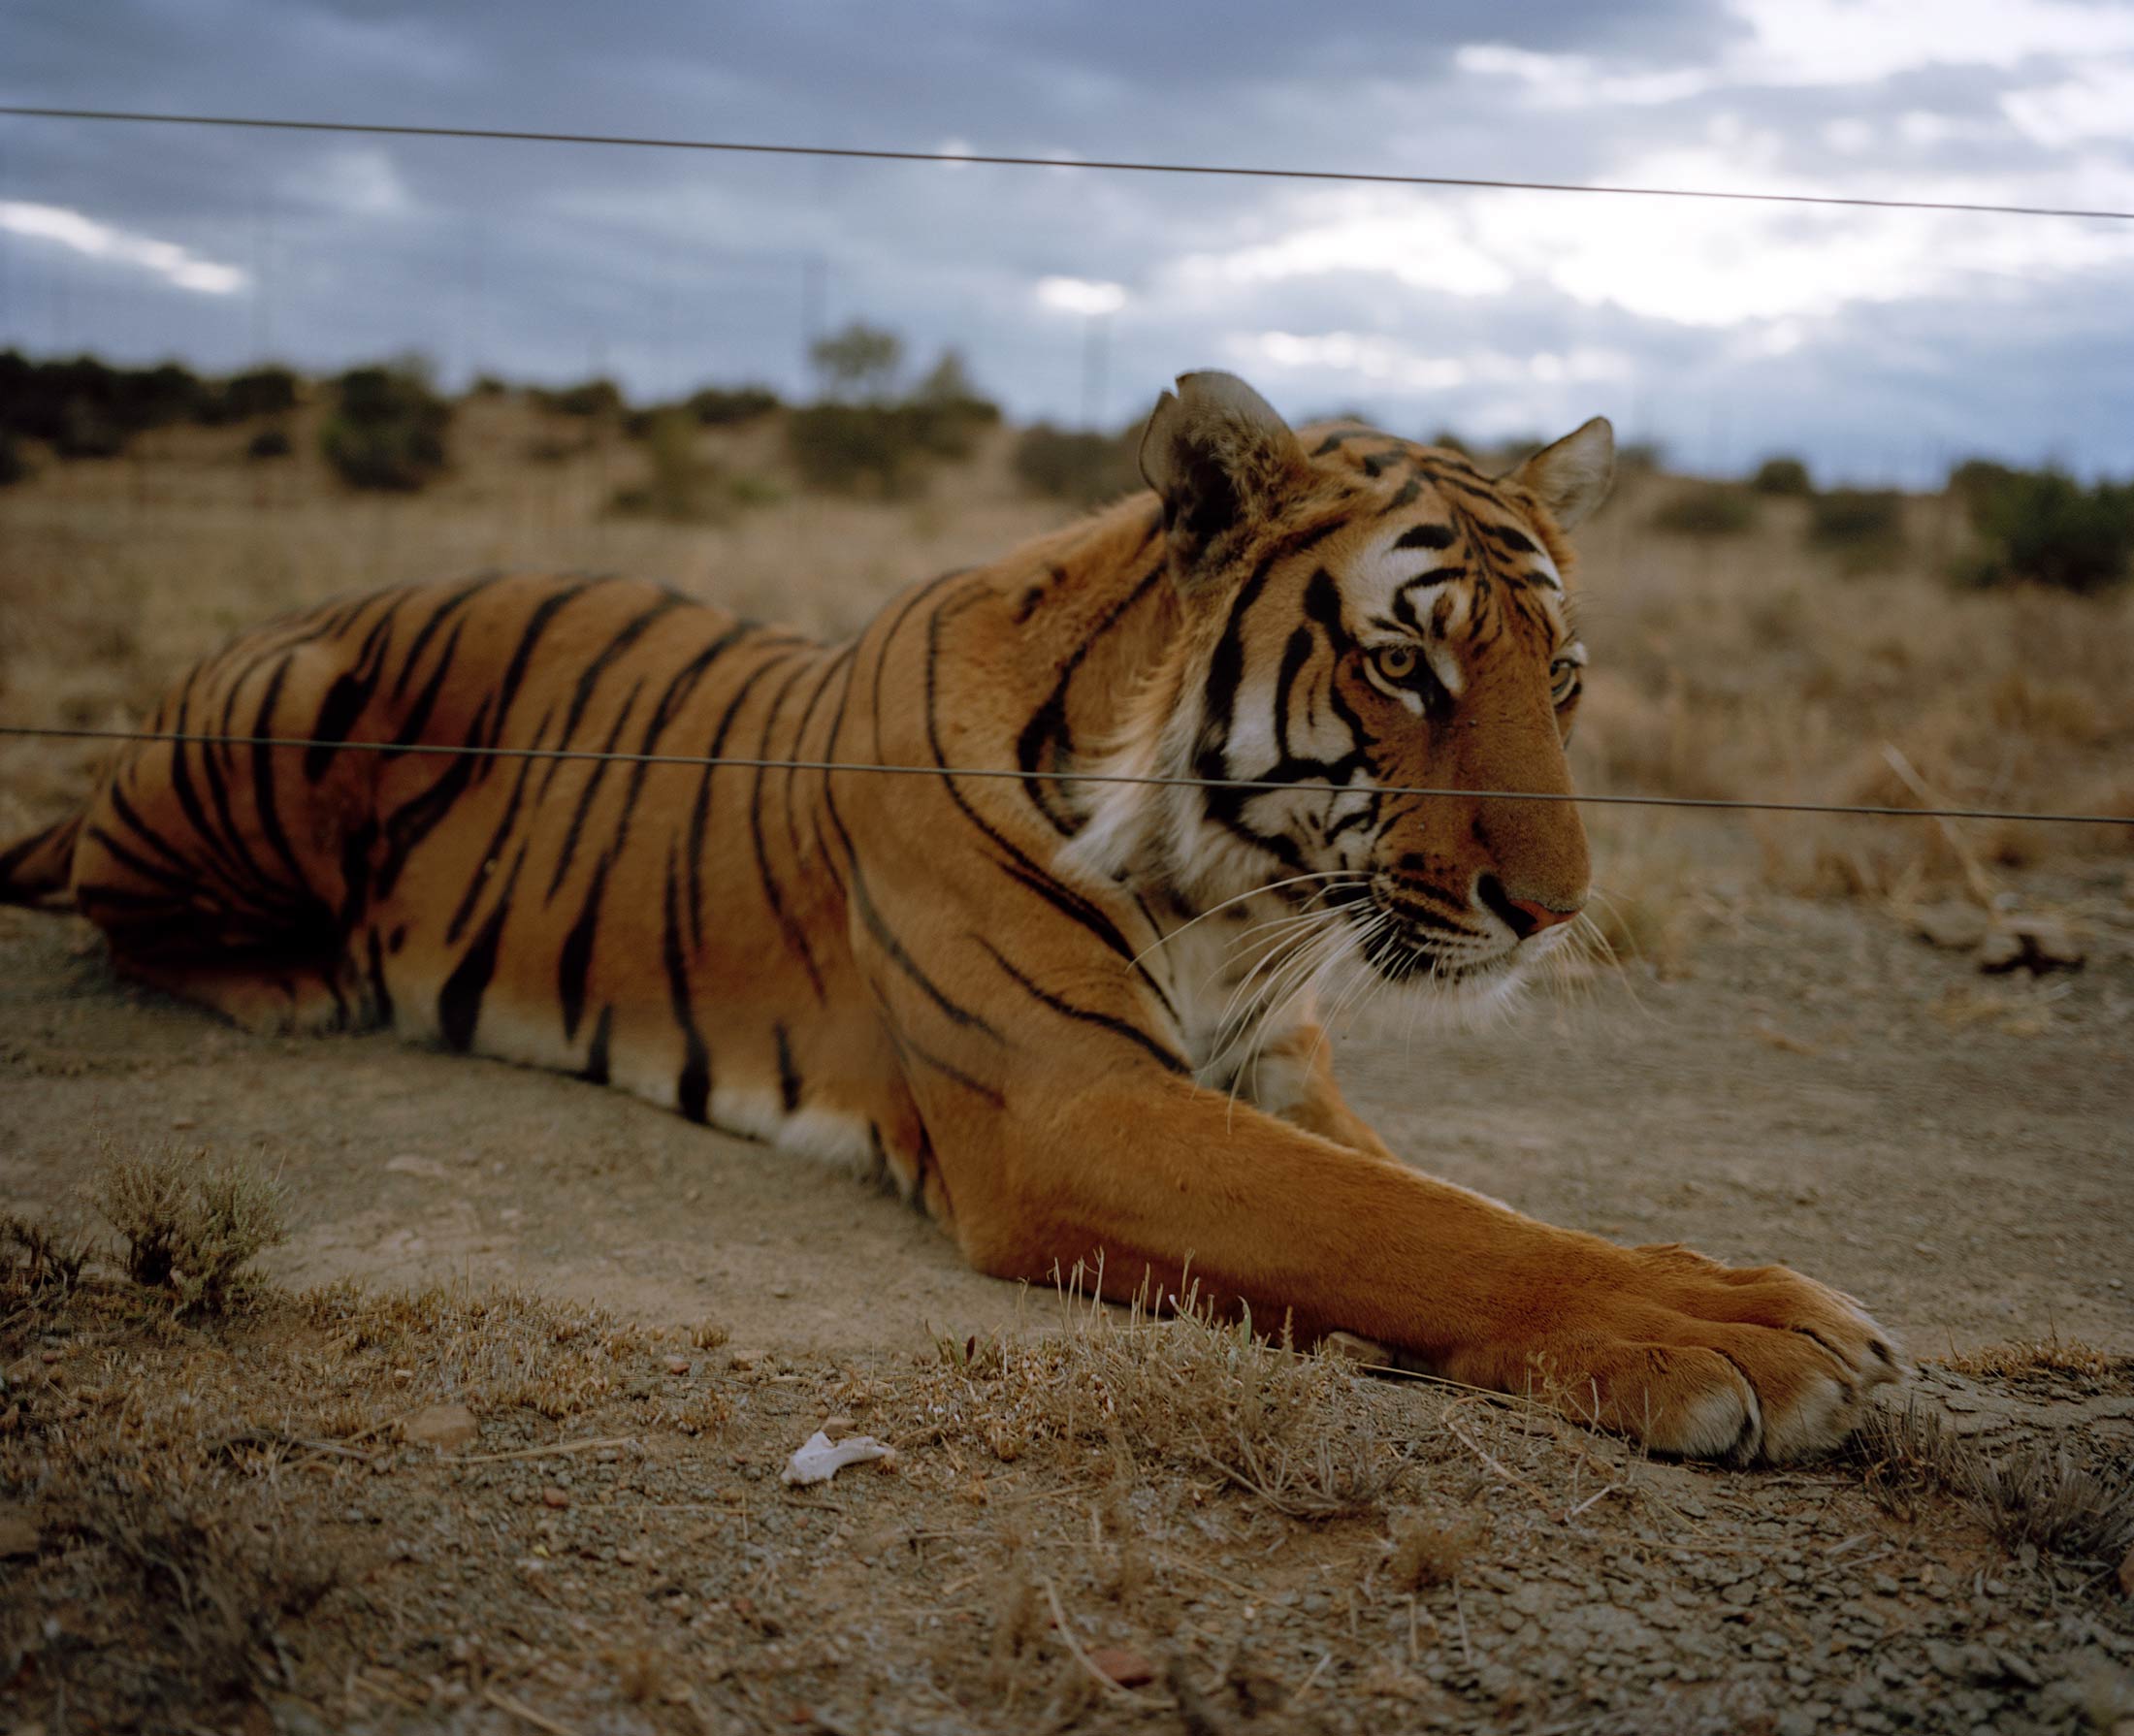 The South China Tiger Is Functionally Extinct. Stuart Bray Has 19 of Them